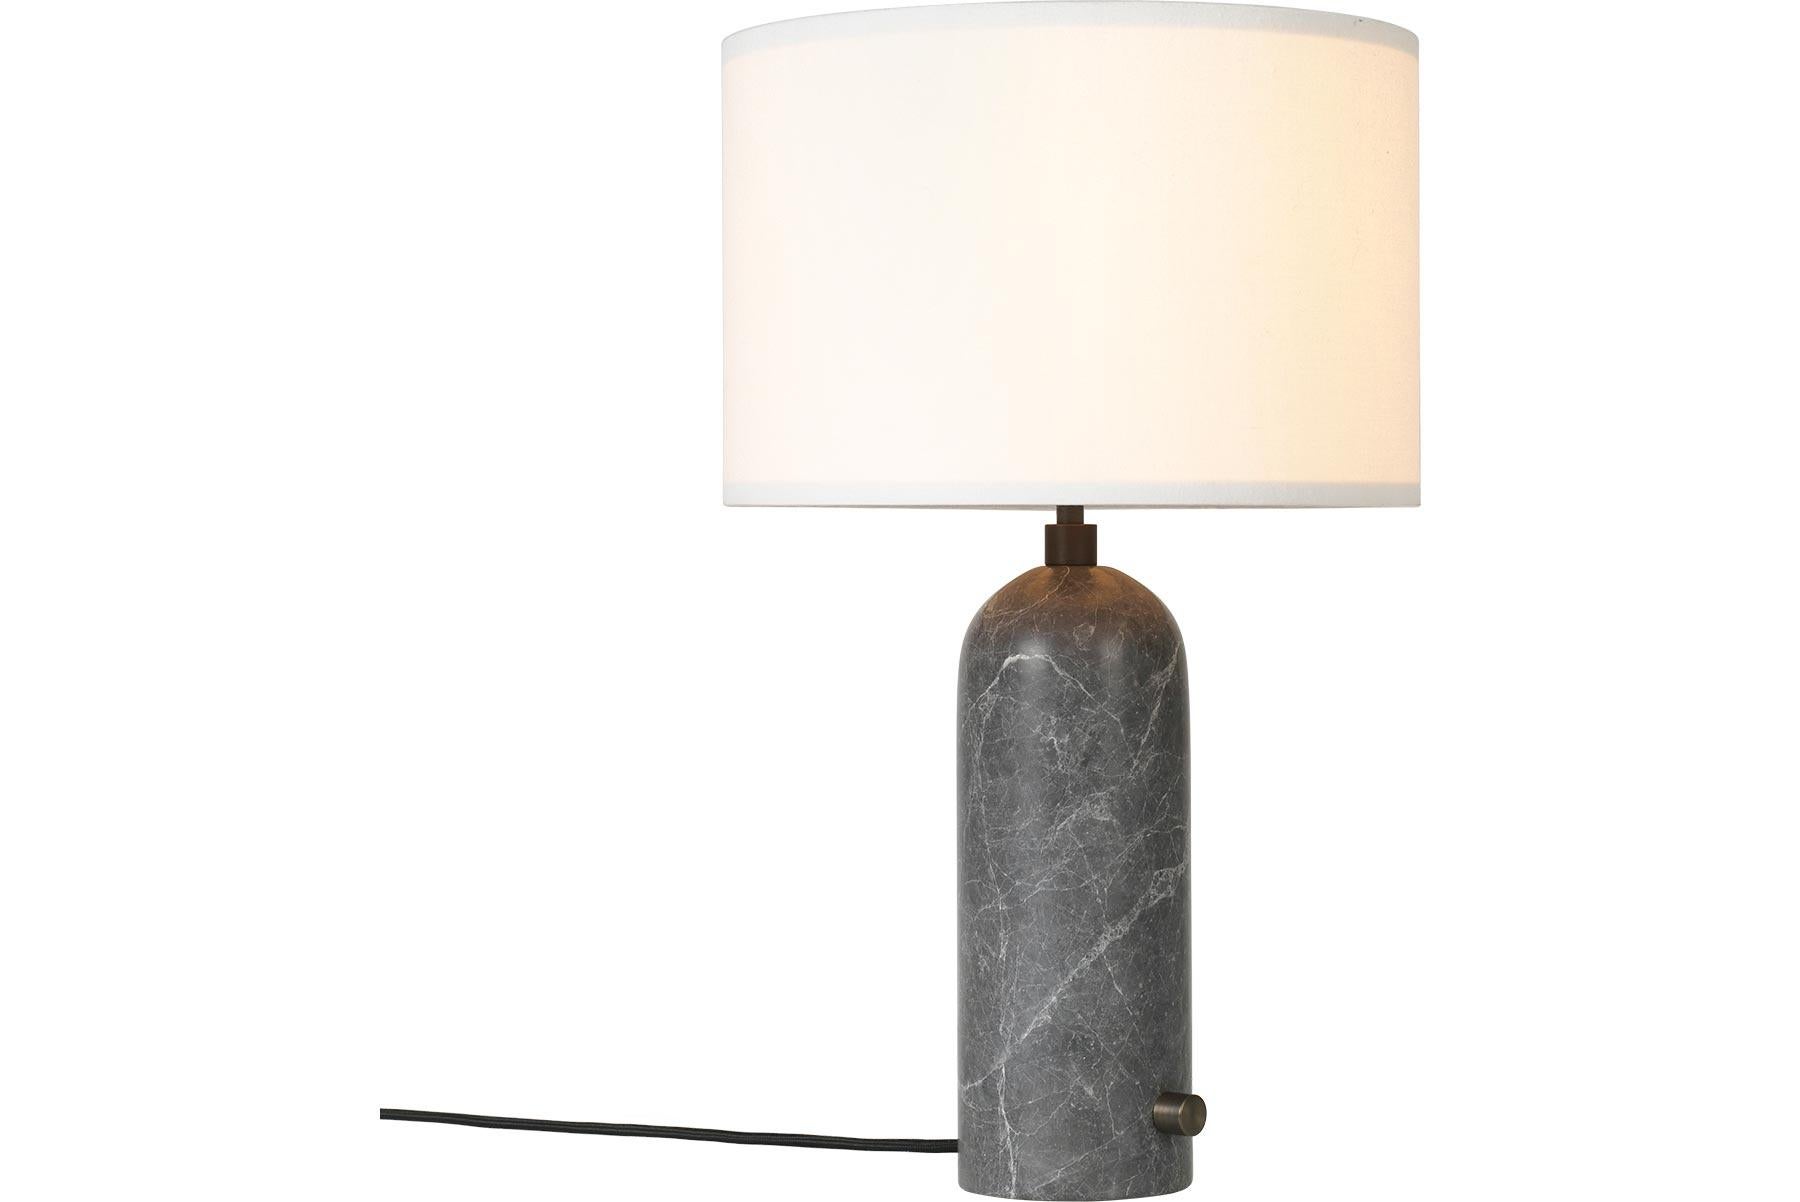 Gravity Table Lamp - Small, Grey Marble, White. For Sale 7